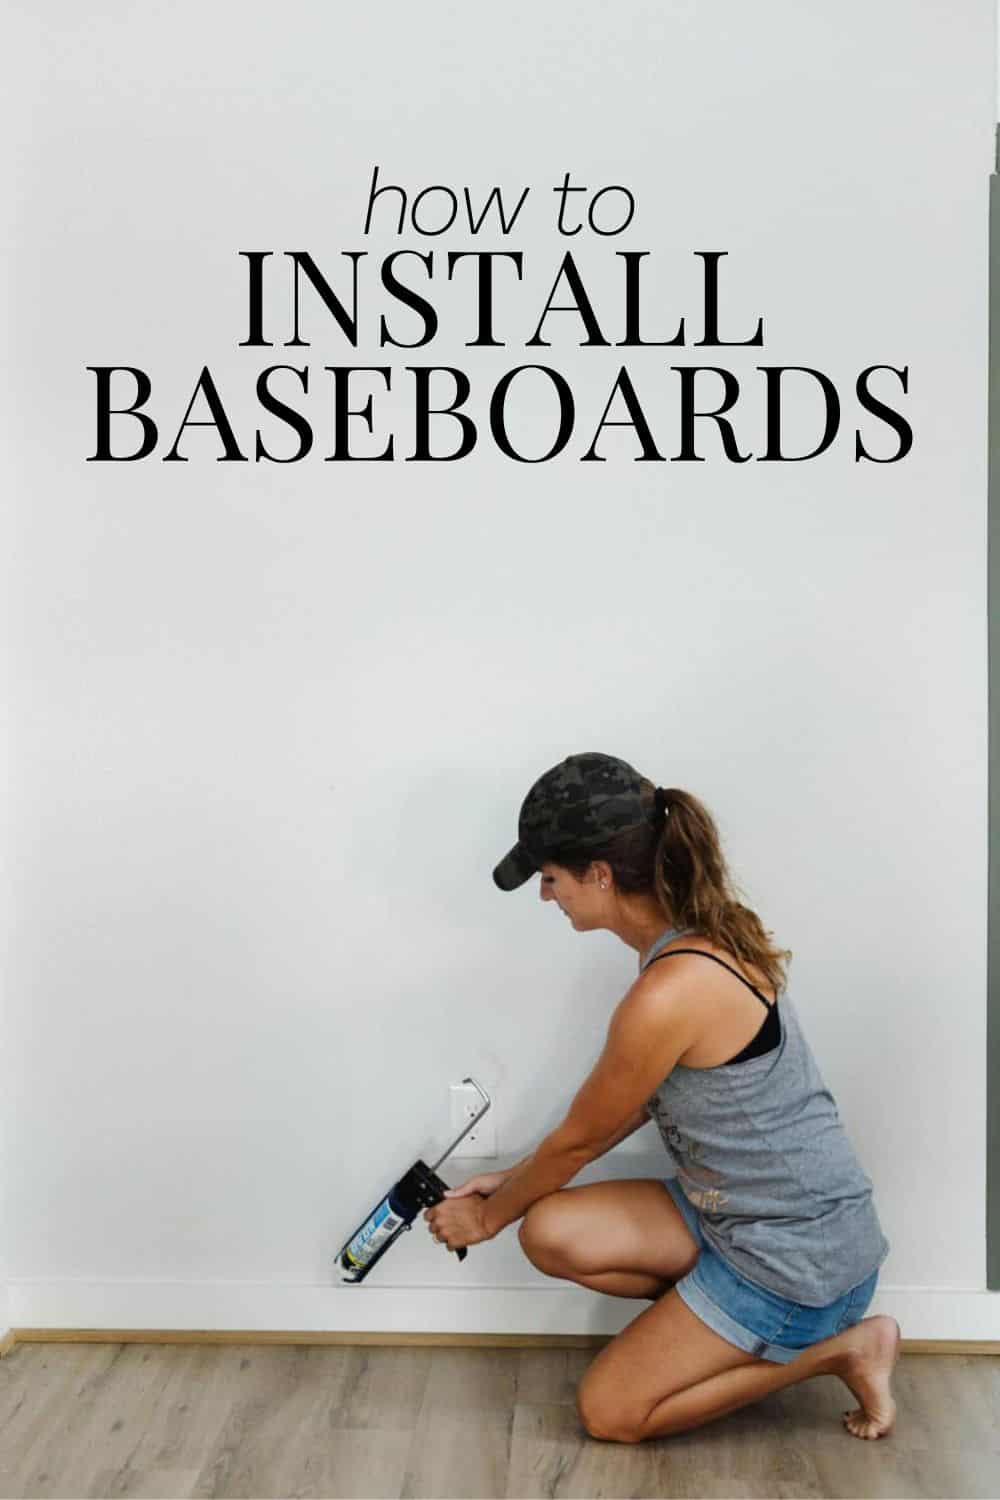 woman caulking a baseboard with text overlay - how to install baseboards 